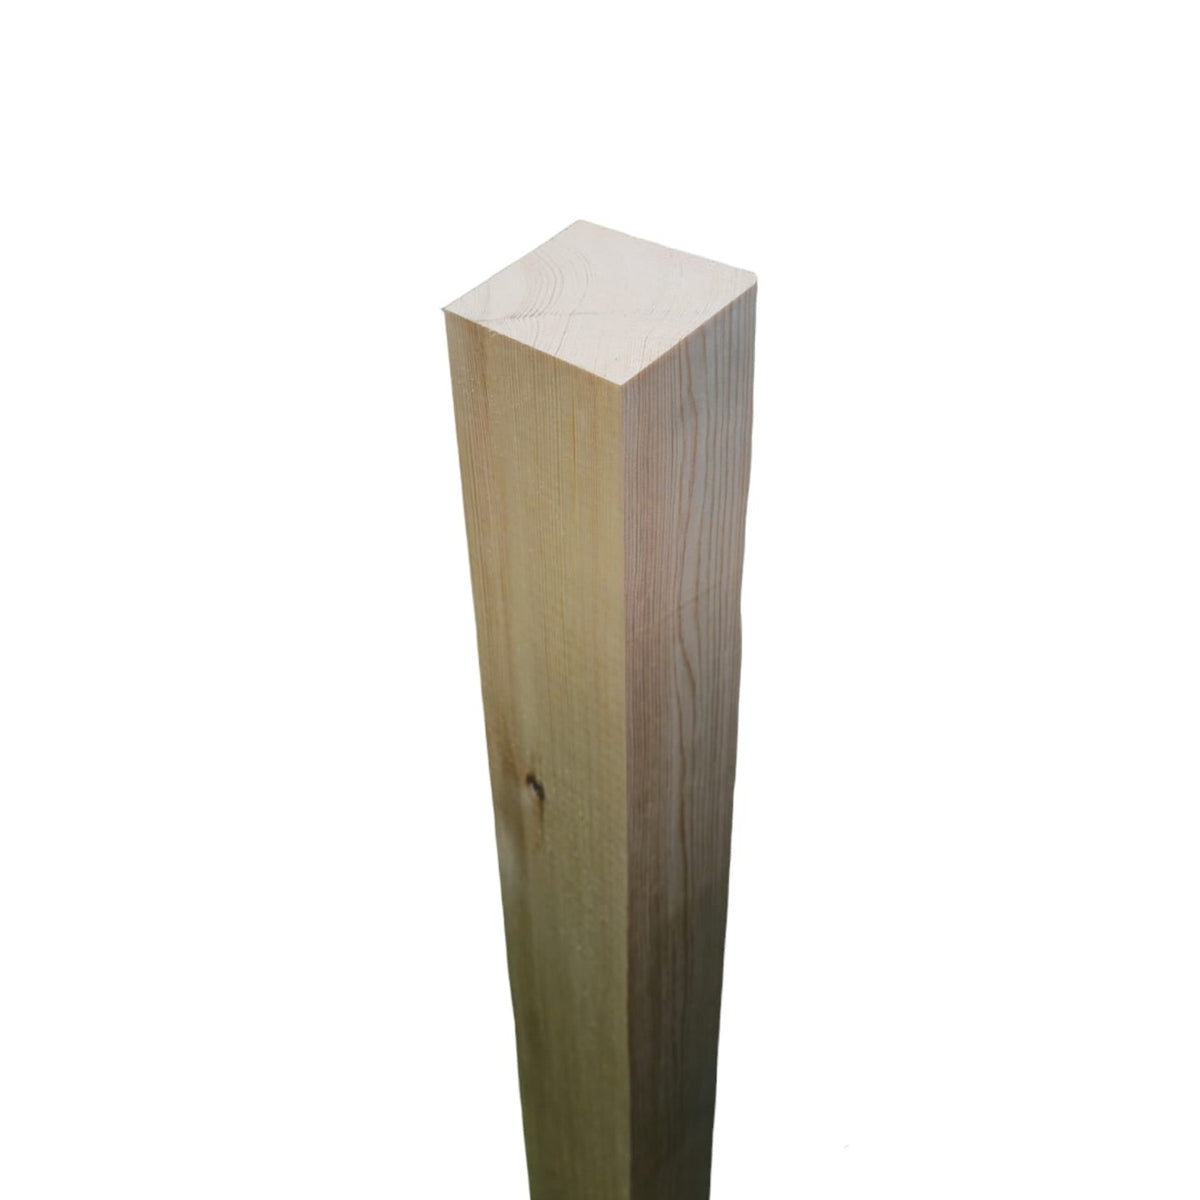 A softwood wall post measuring 95mm x 70mm